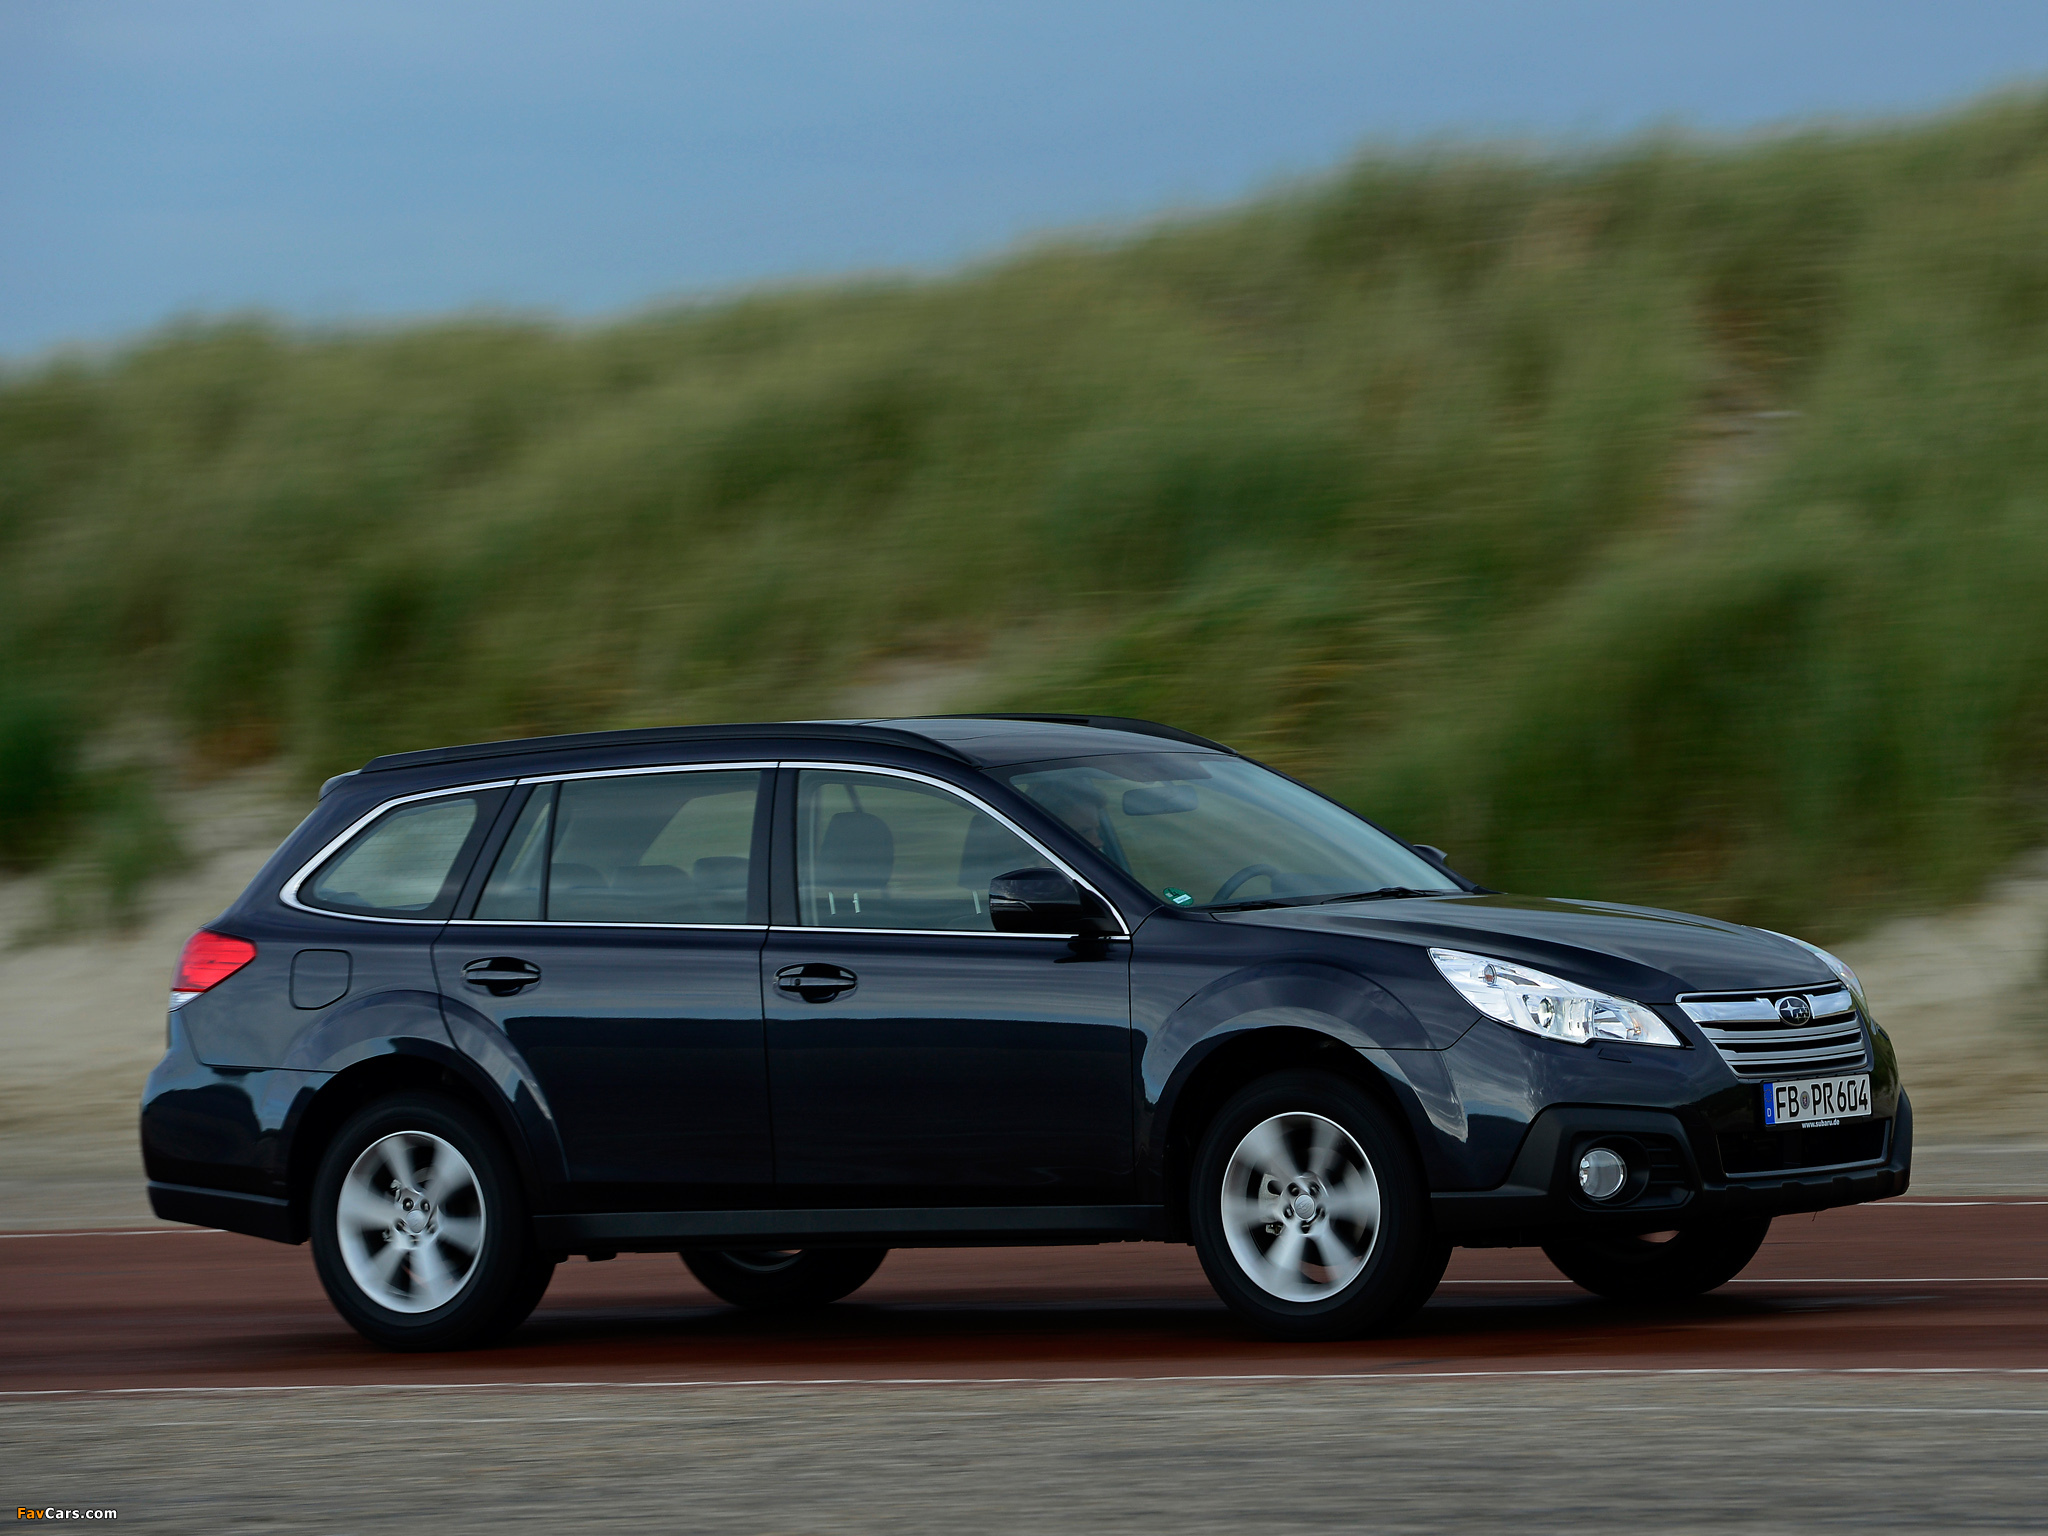 Subaru Outback 2.5i (BR) 2012 pictures (2048 x 1536)